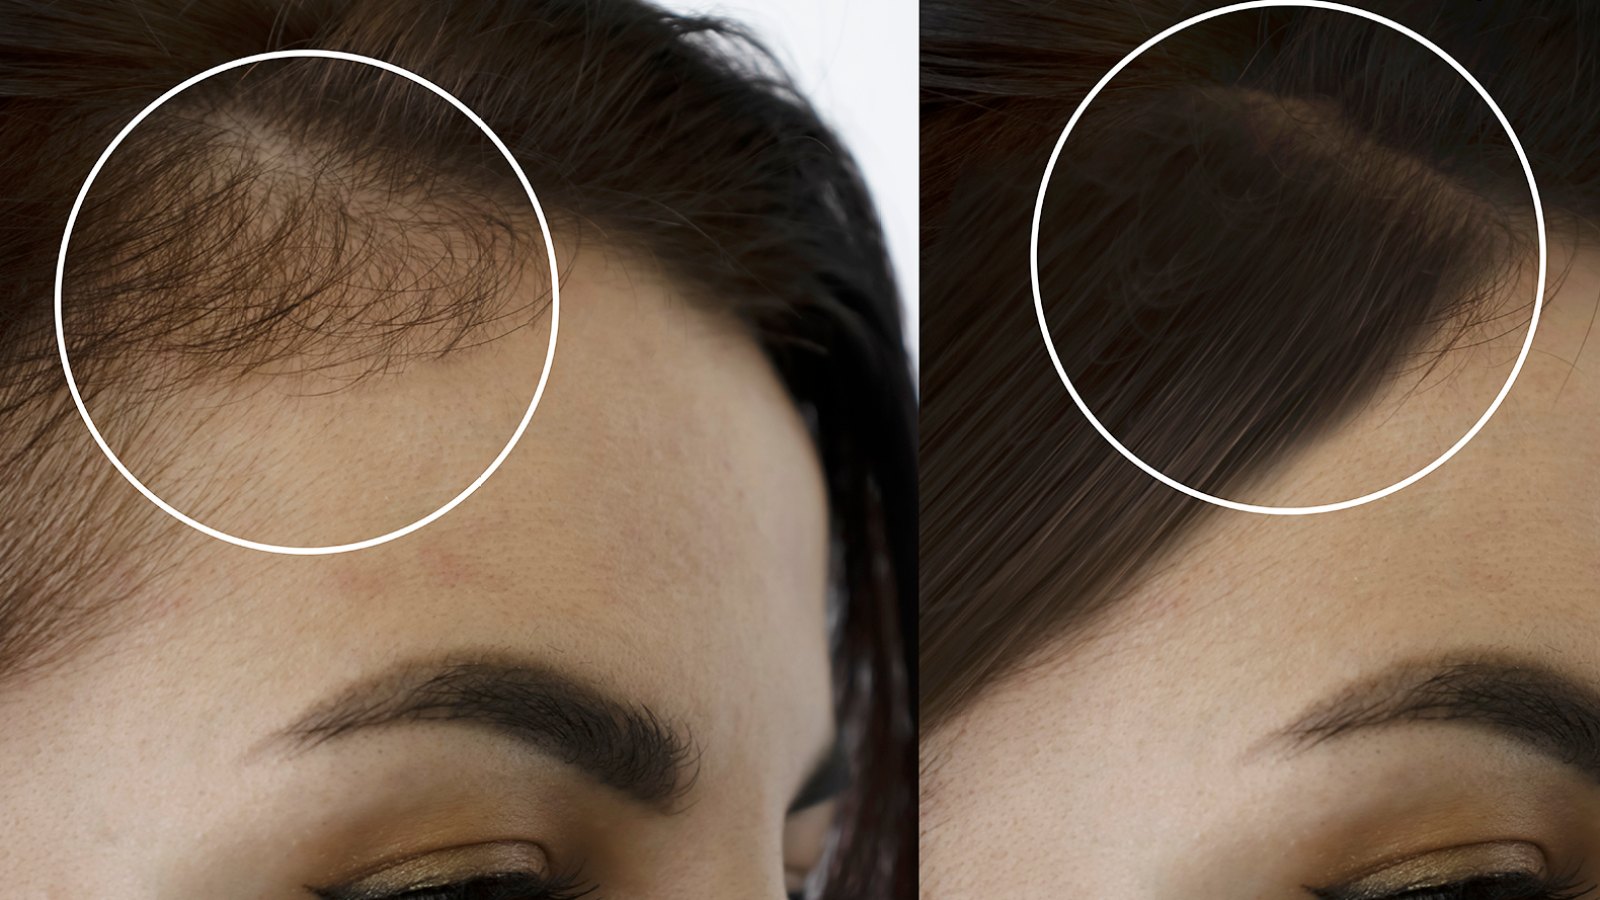 woman head baldness before and after treatment